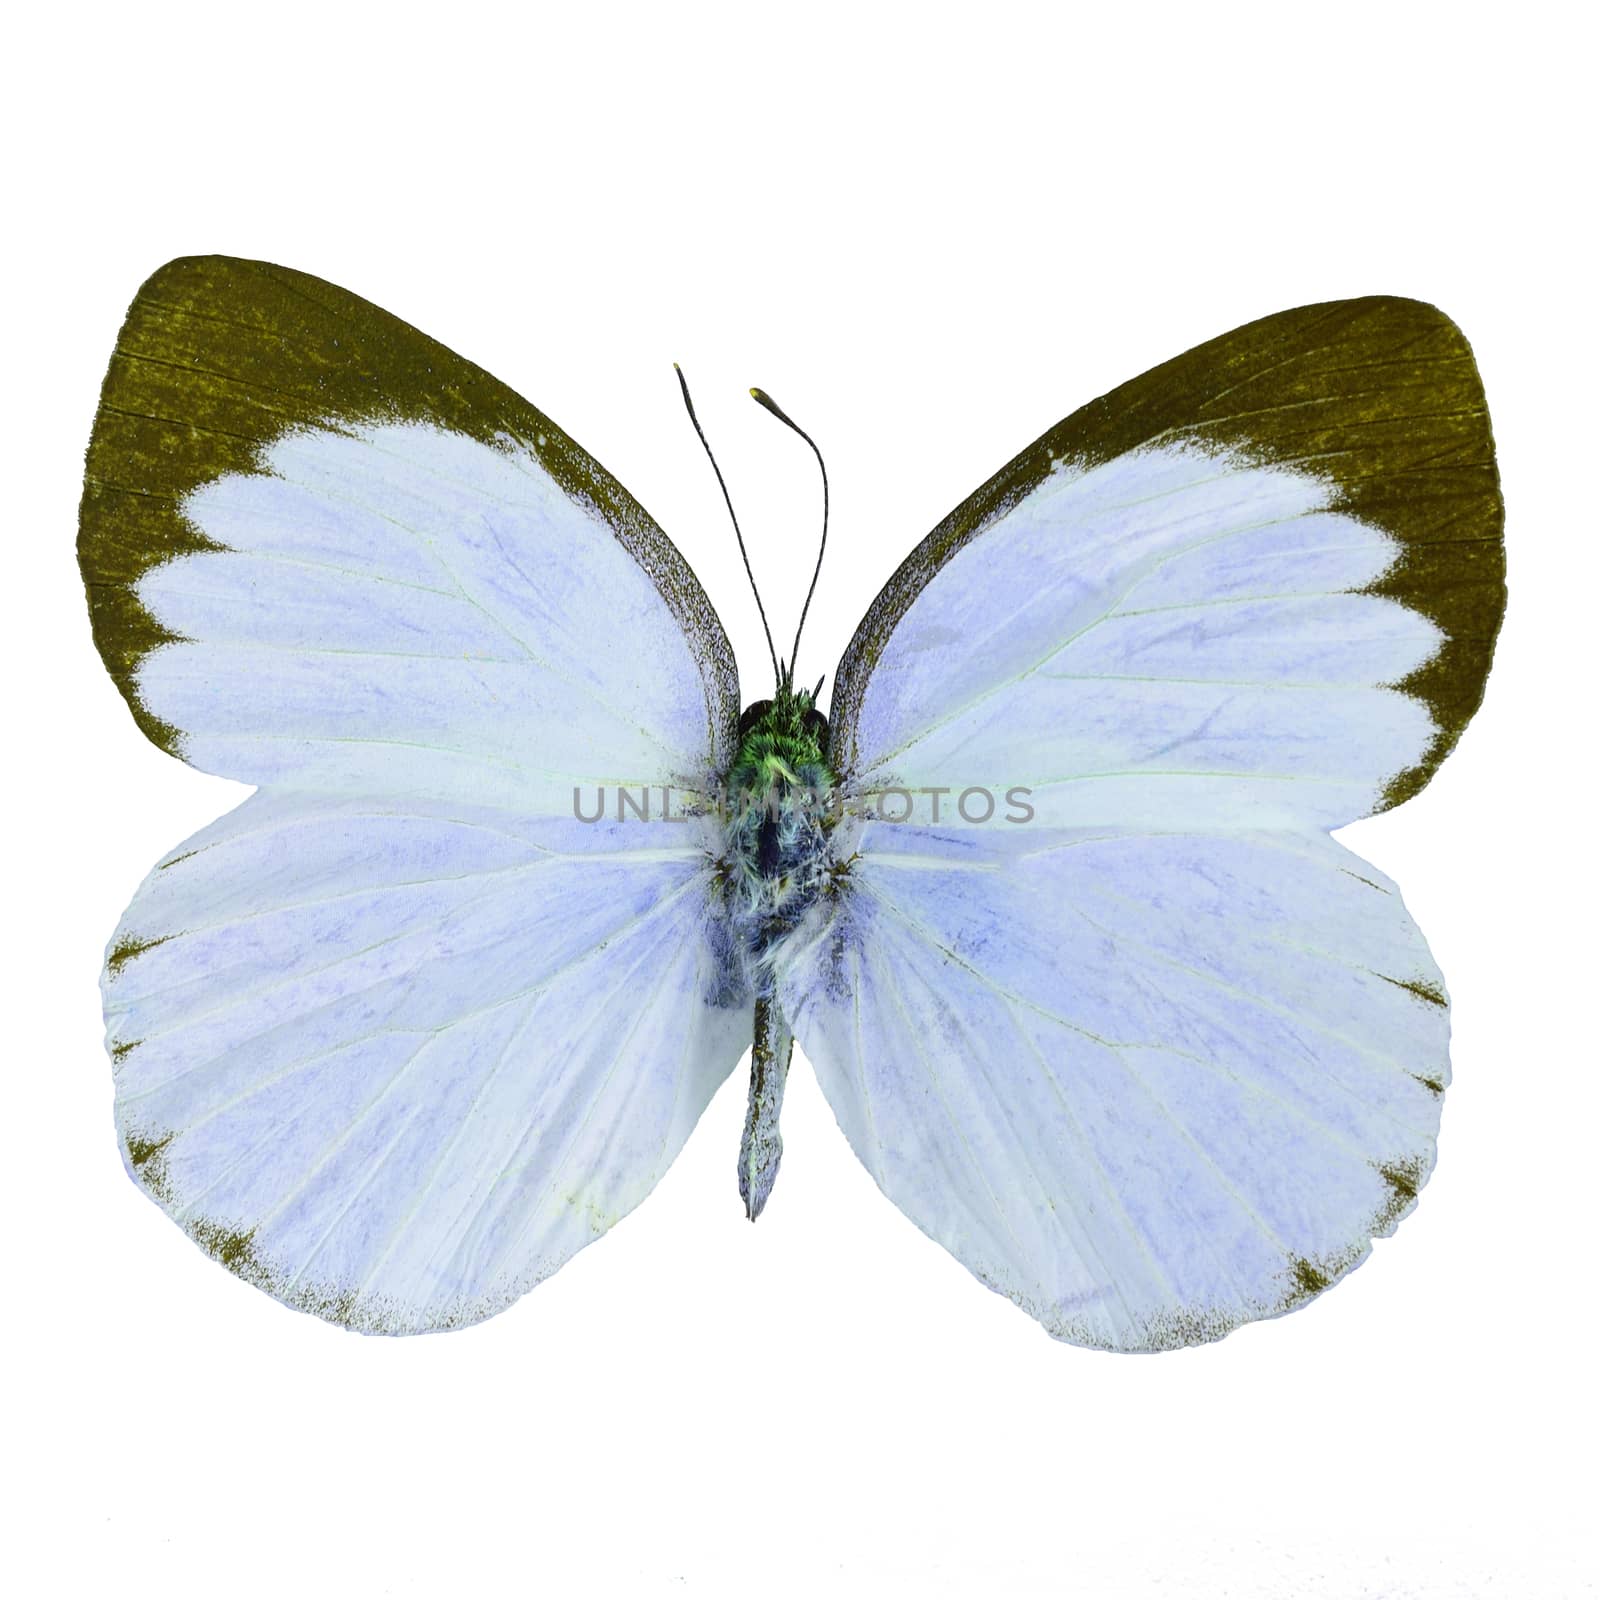 Blue butterfly, Delias butterfly (Delias belisama) in fancy color profile, isolated on white background